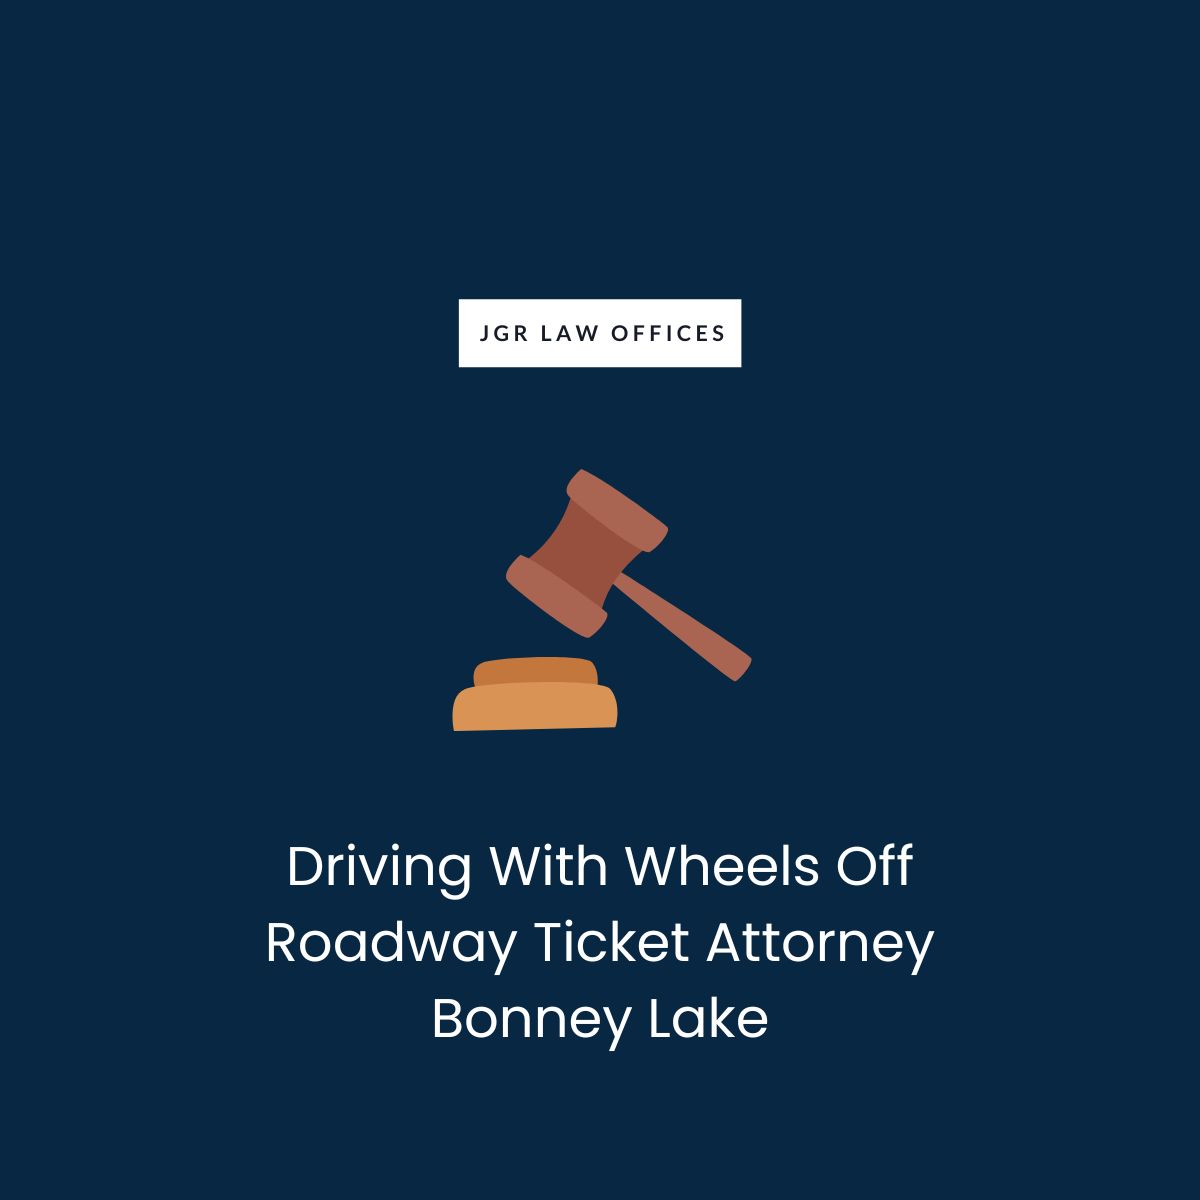 Driving With Wheels Off Roadway Ticket Attorney Bonney Lake